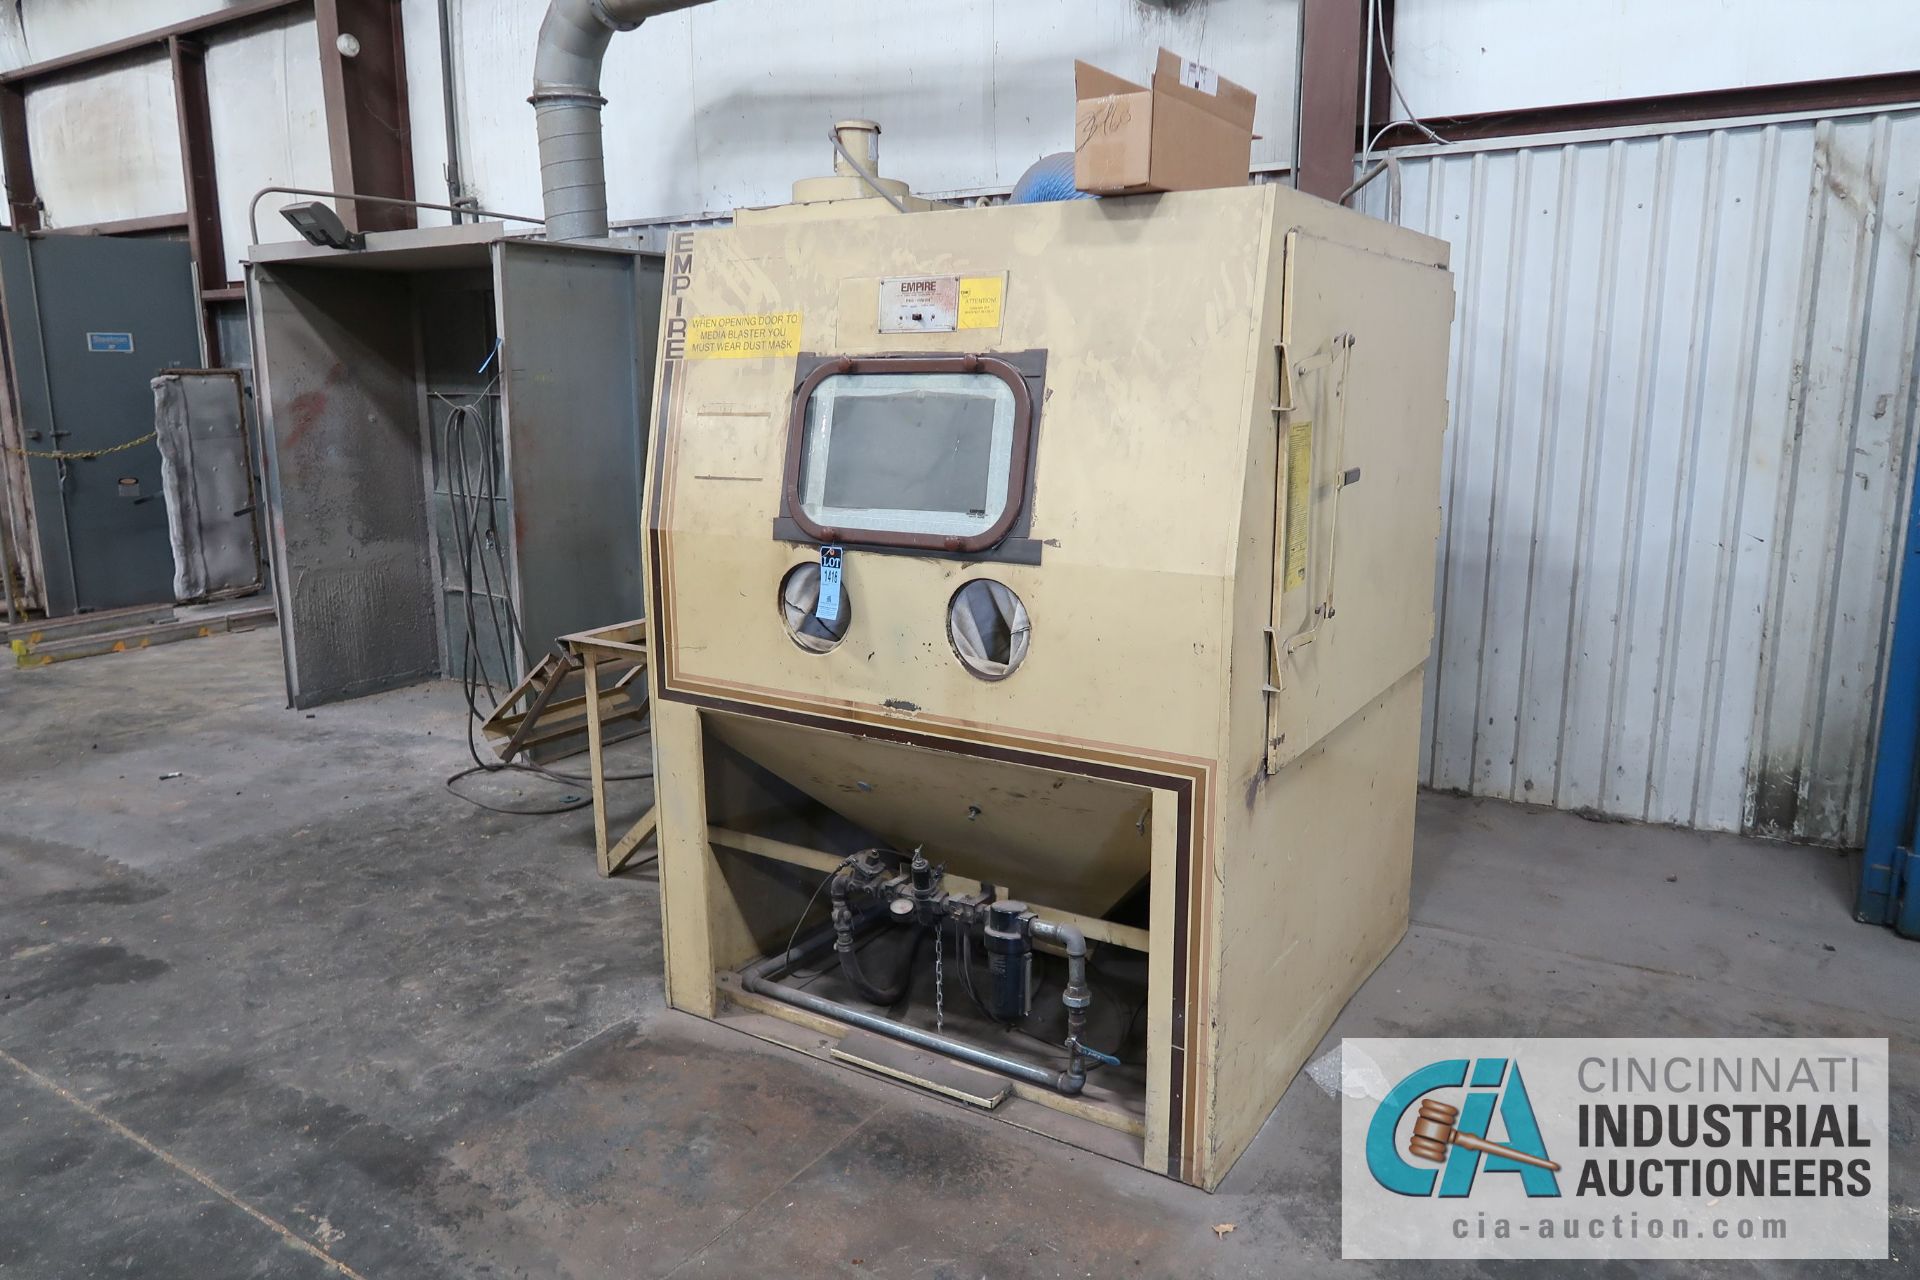 5' X 5' EMPIRE MODEL 6060PF BLAST CABINET; S/N 8003, WITH EMPIRE MODEL DCM-200A DUST COLLECTOR,